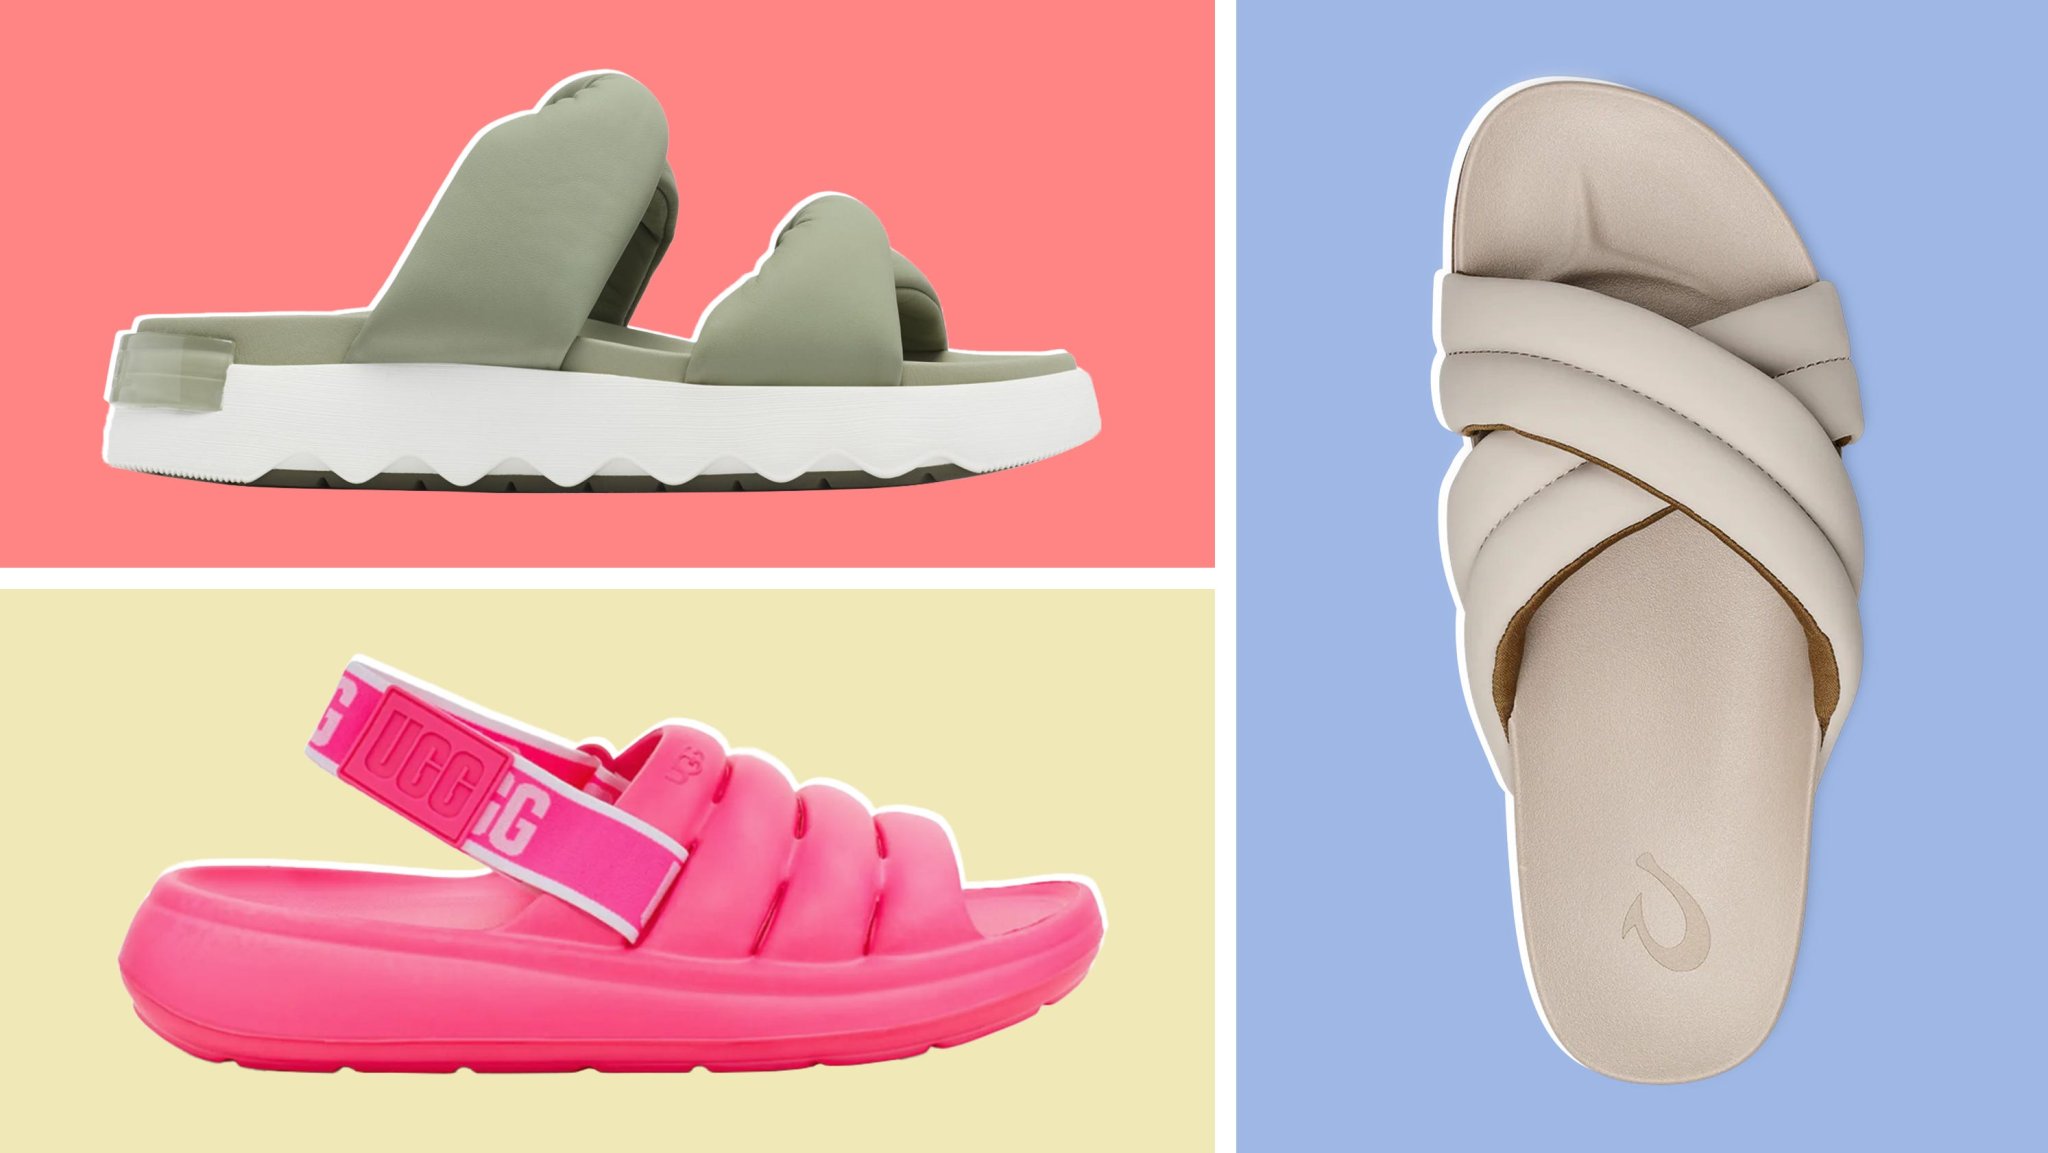 Float through summer 2023 in the puffy sandal trend—shop Ugg, Sorel and Olukai